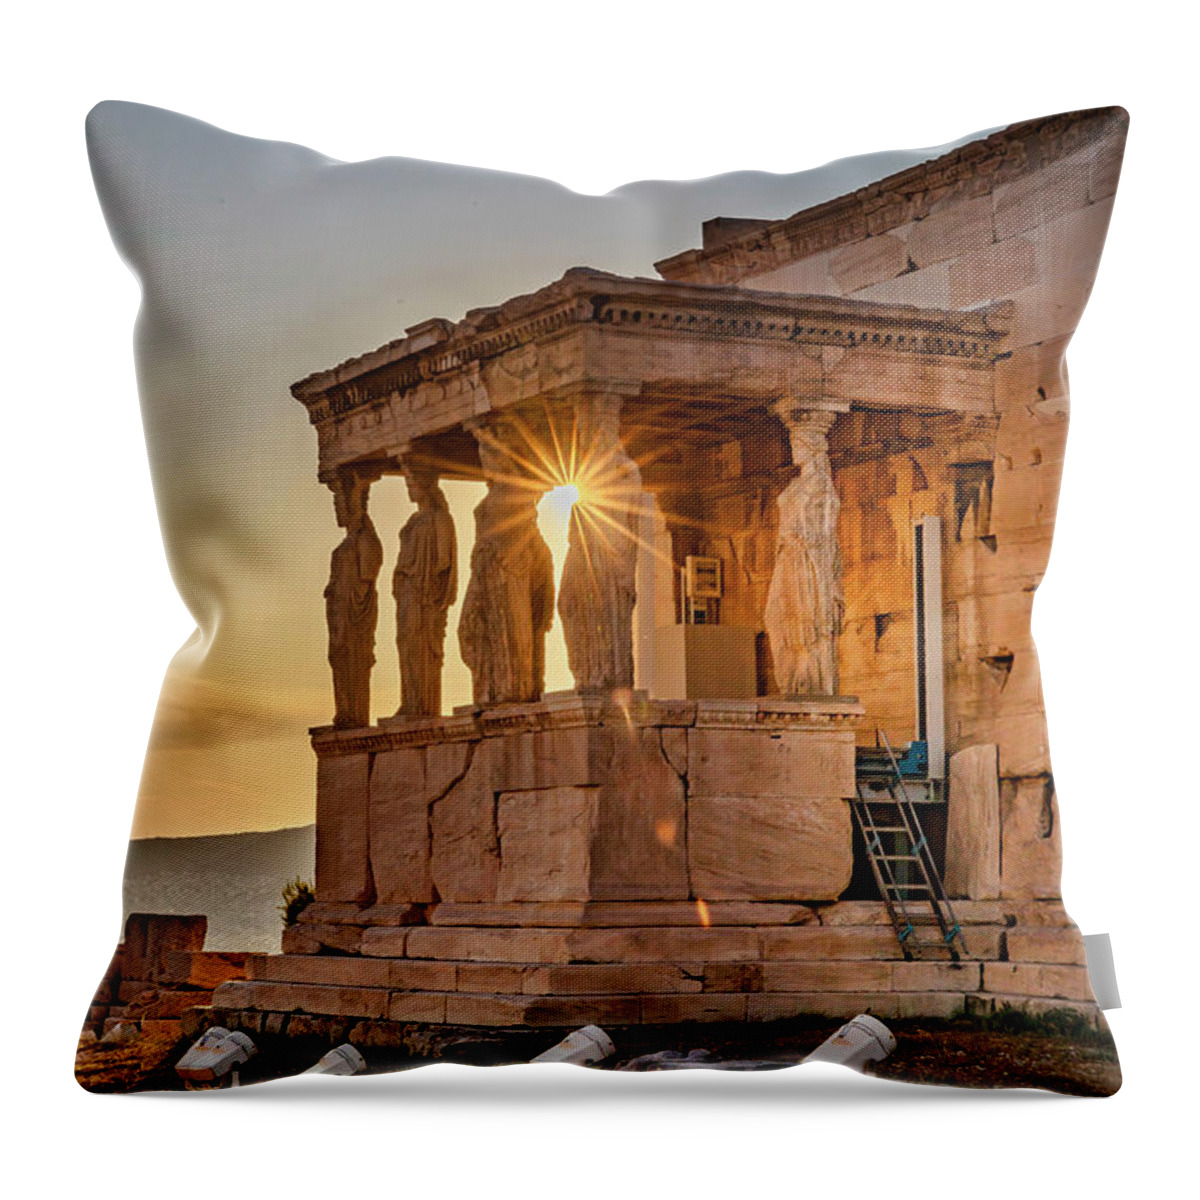 Estock Throw Pillow featuring the digital art Temple At Acropolis, Athens, Greece #5 by Claudia Uripos